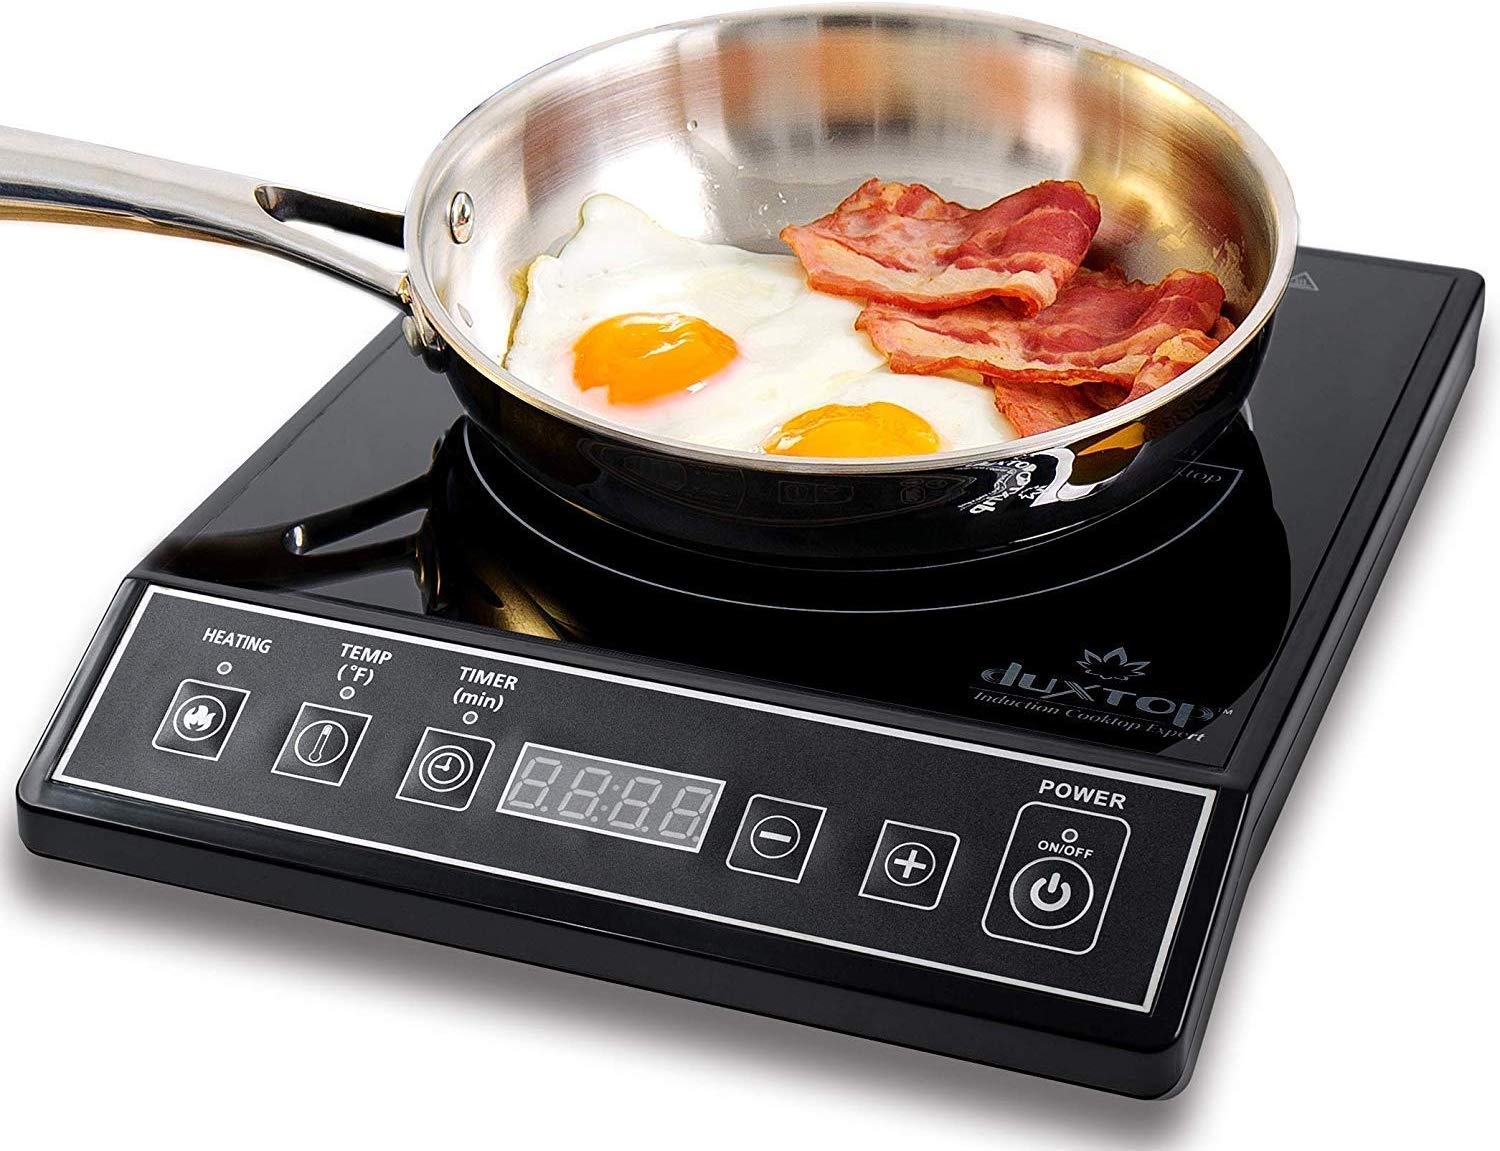 Electric Induction Cooktop for sale online Secura DuxTop Black 11.5 in 